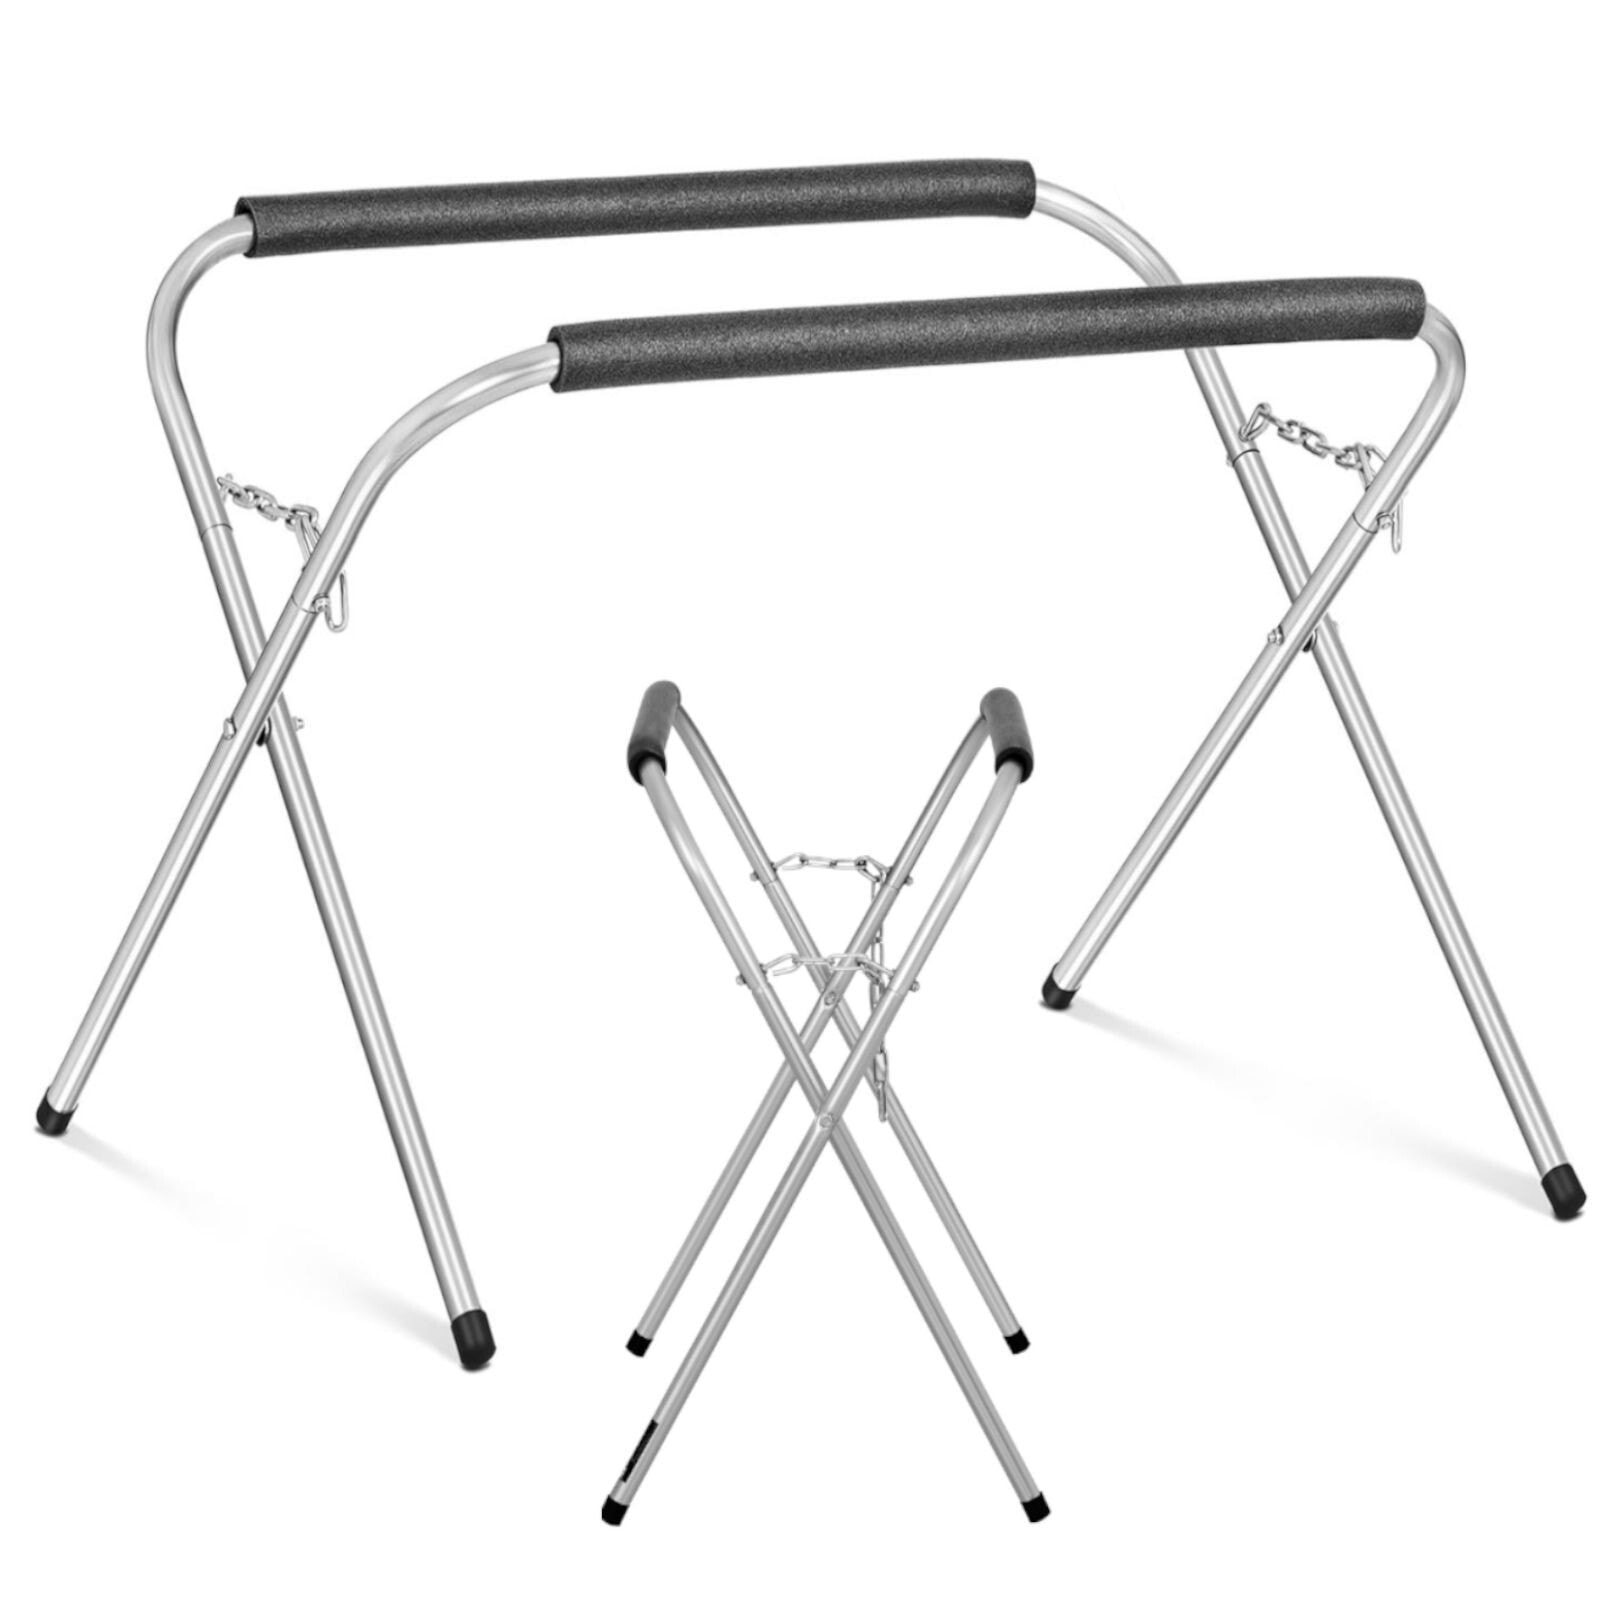 X type extensible painting stand for the car body up to 220 kg